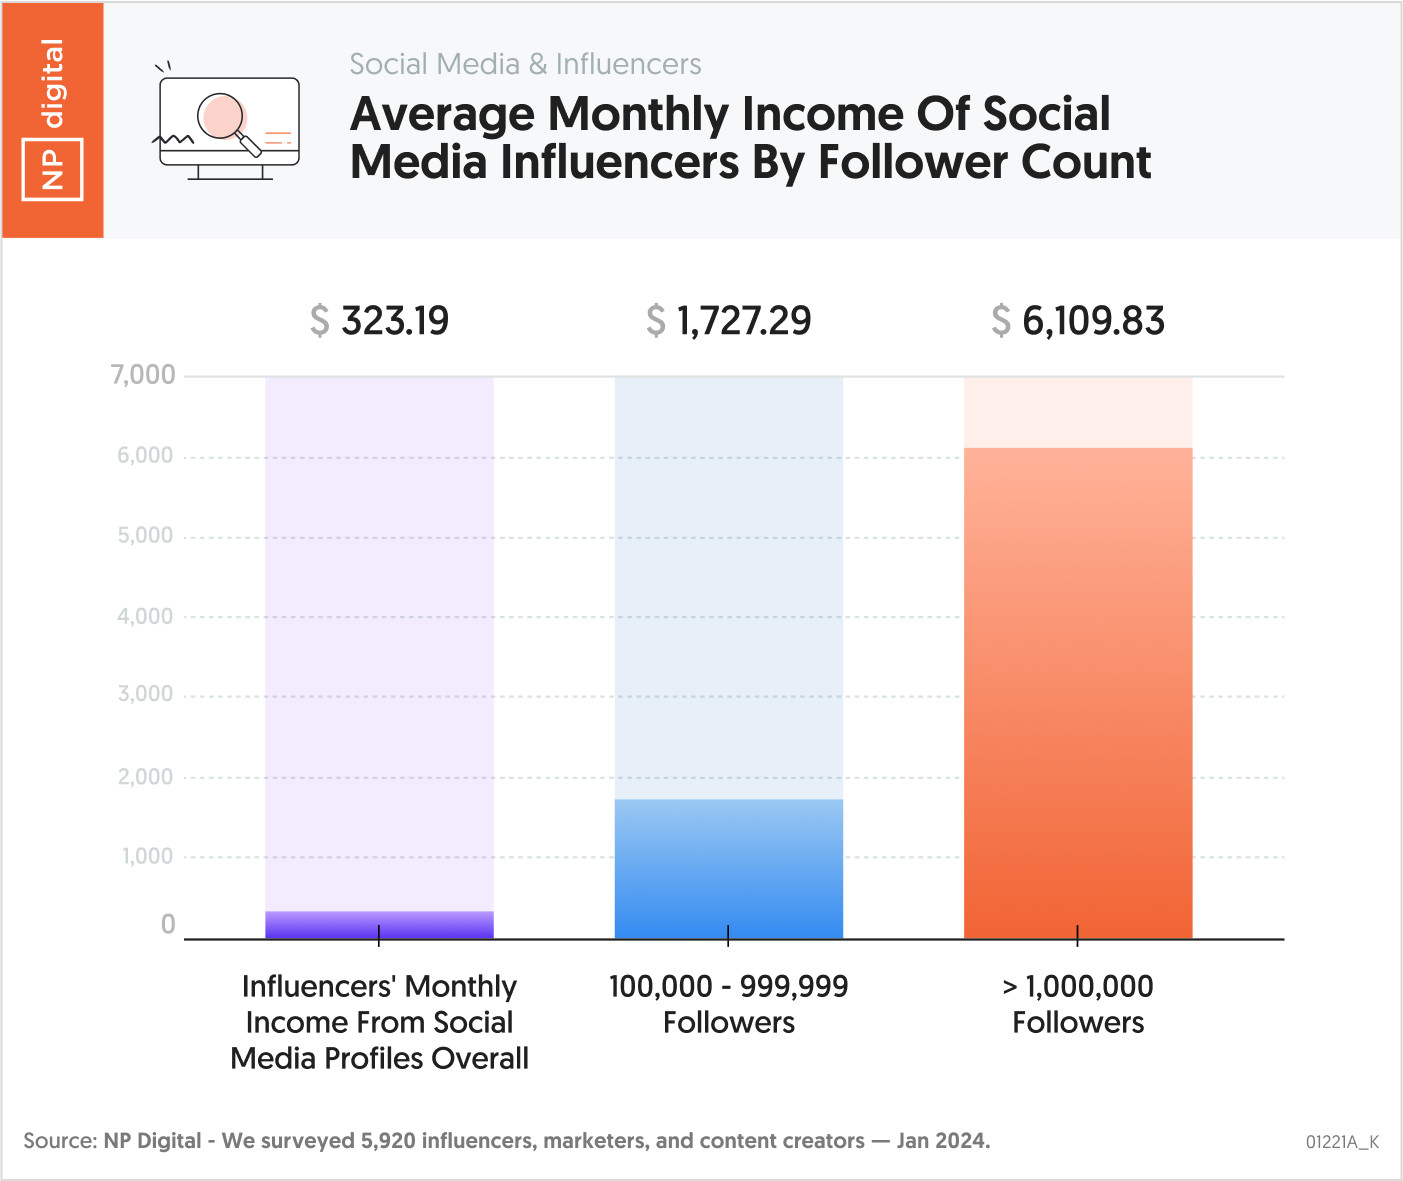 Chart 1 - Social Media & Influencers Average Monthly Income of Social Media Influencers by Follower Count - Neil Patel - by NP Digital